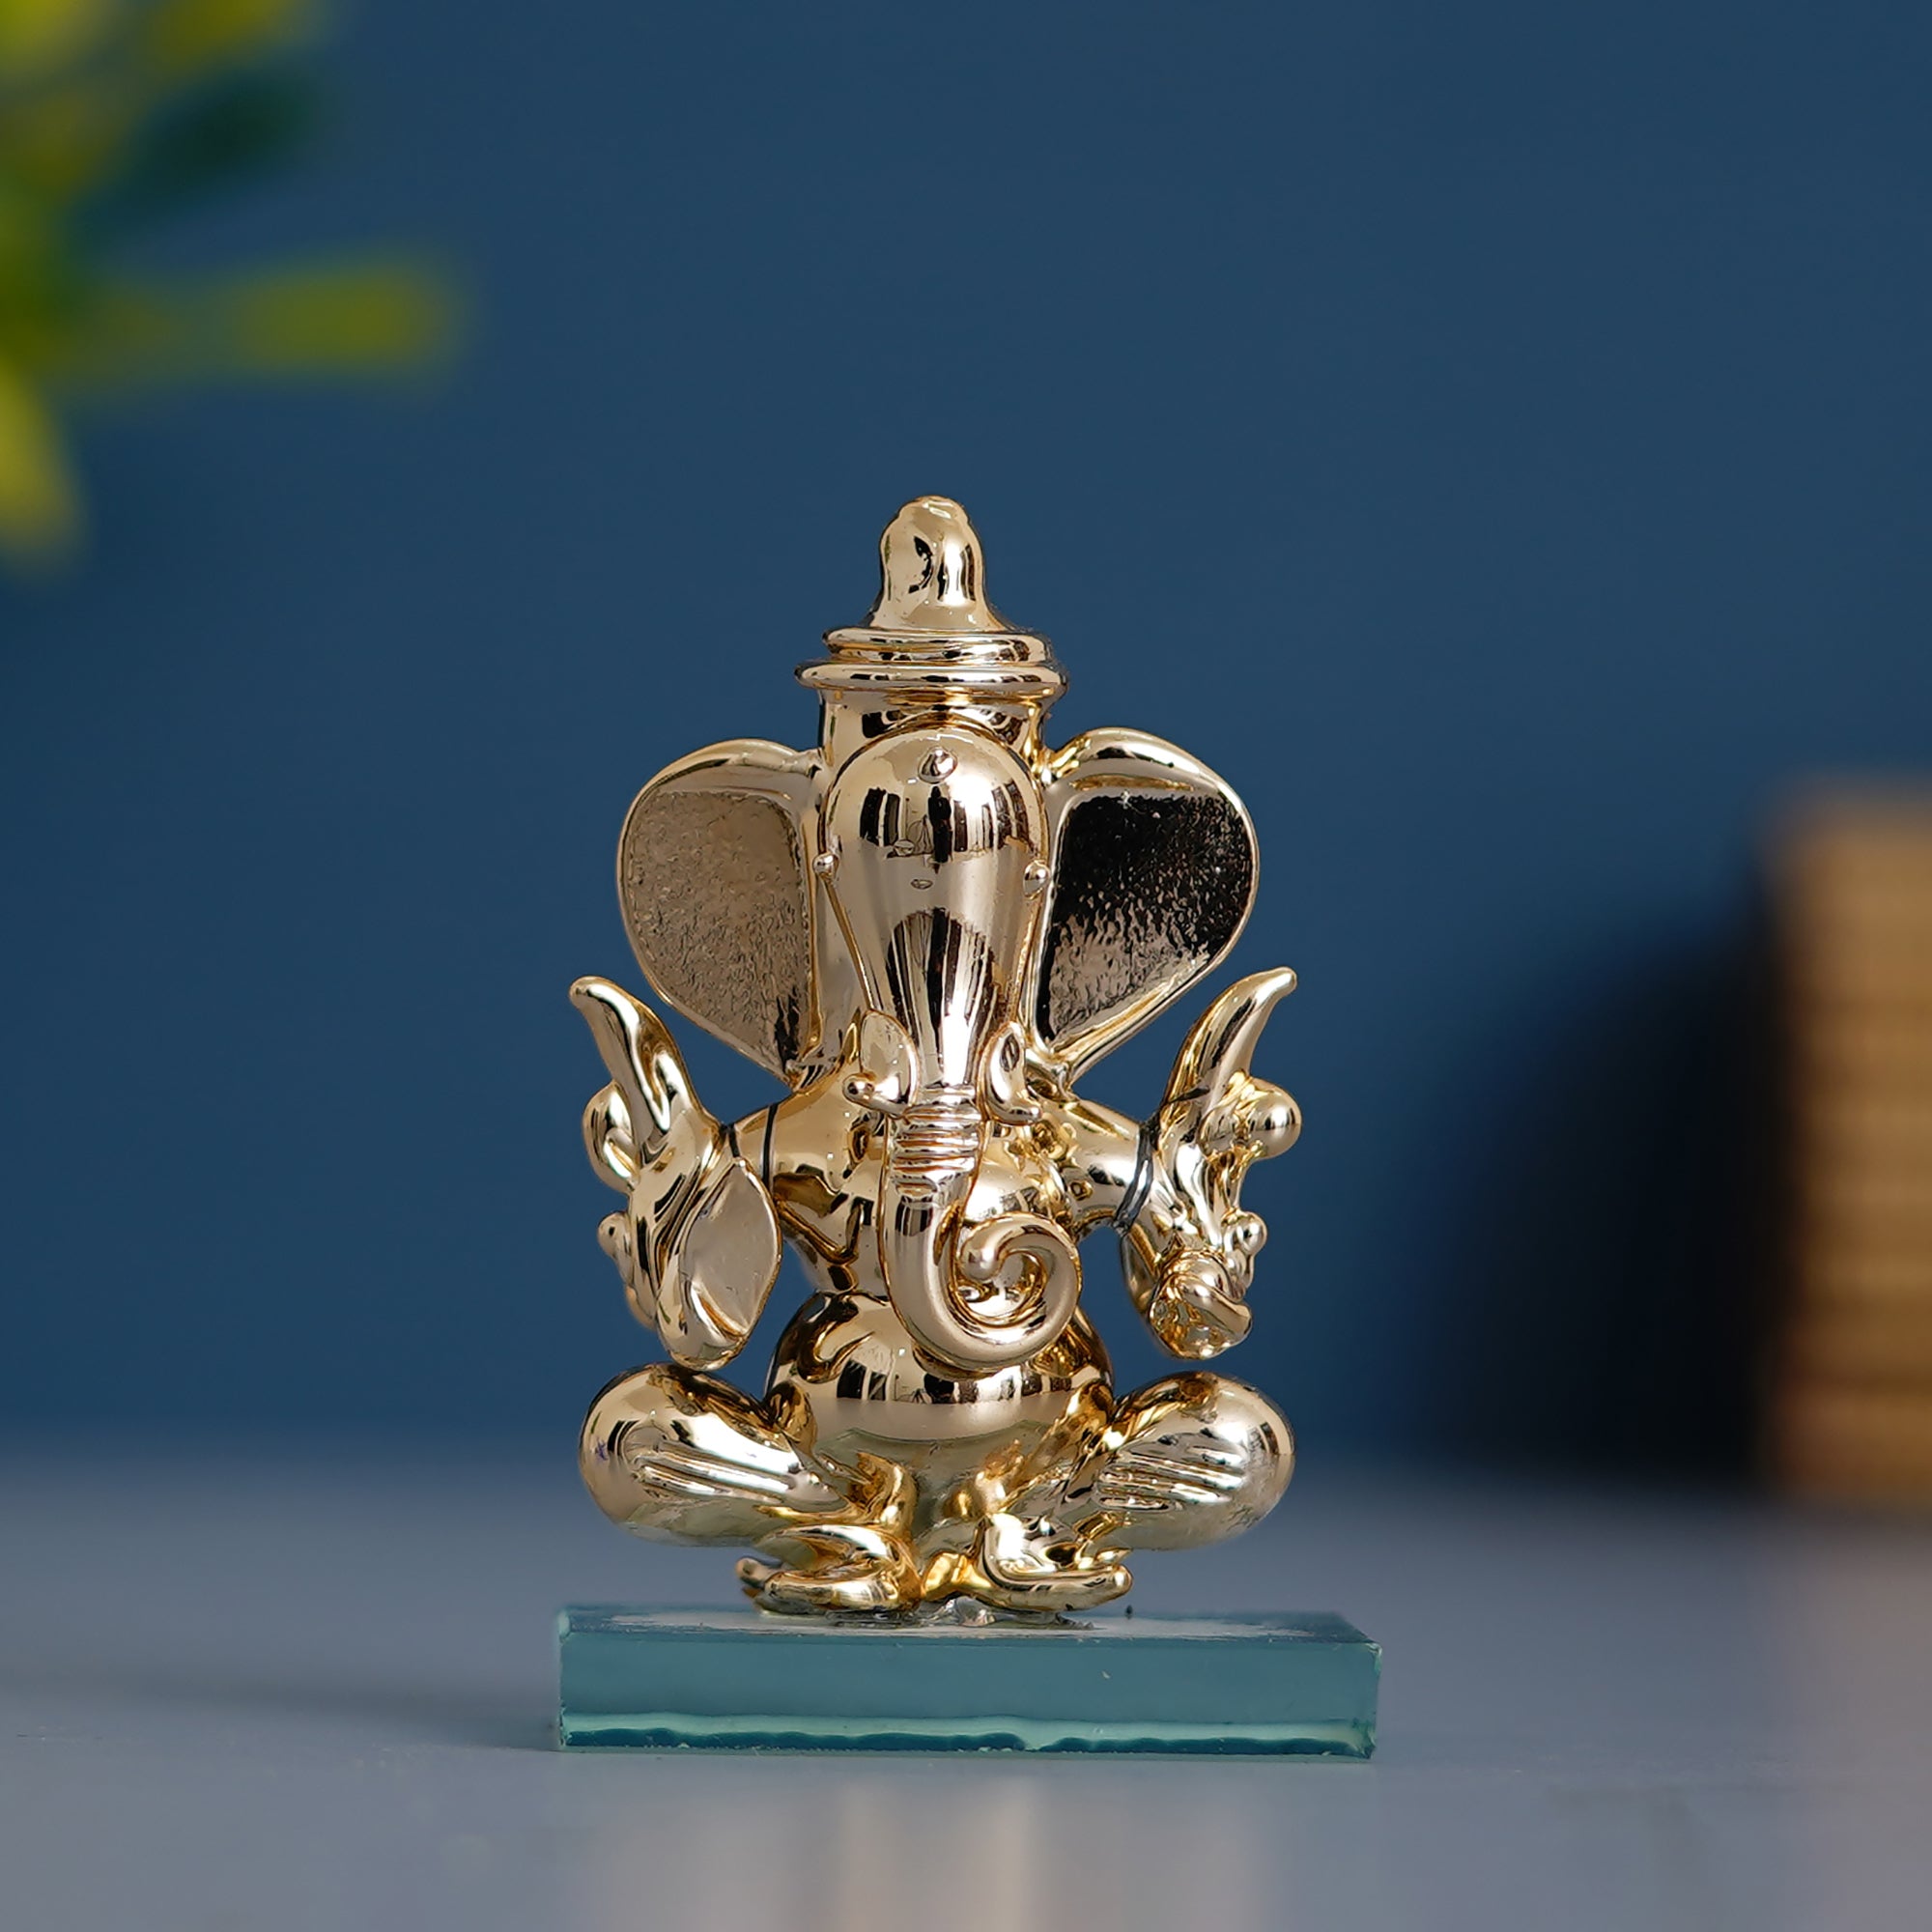 Golden Lord Ganesha Crystal Statue for Home and Car Dashboard